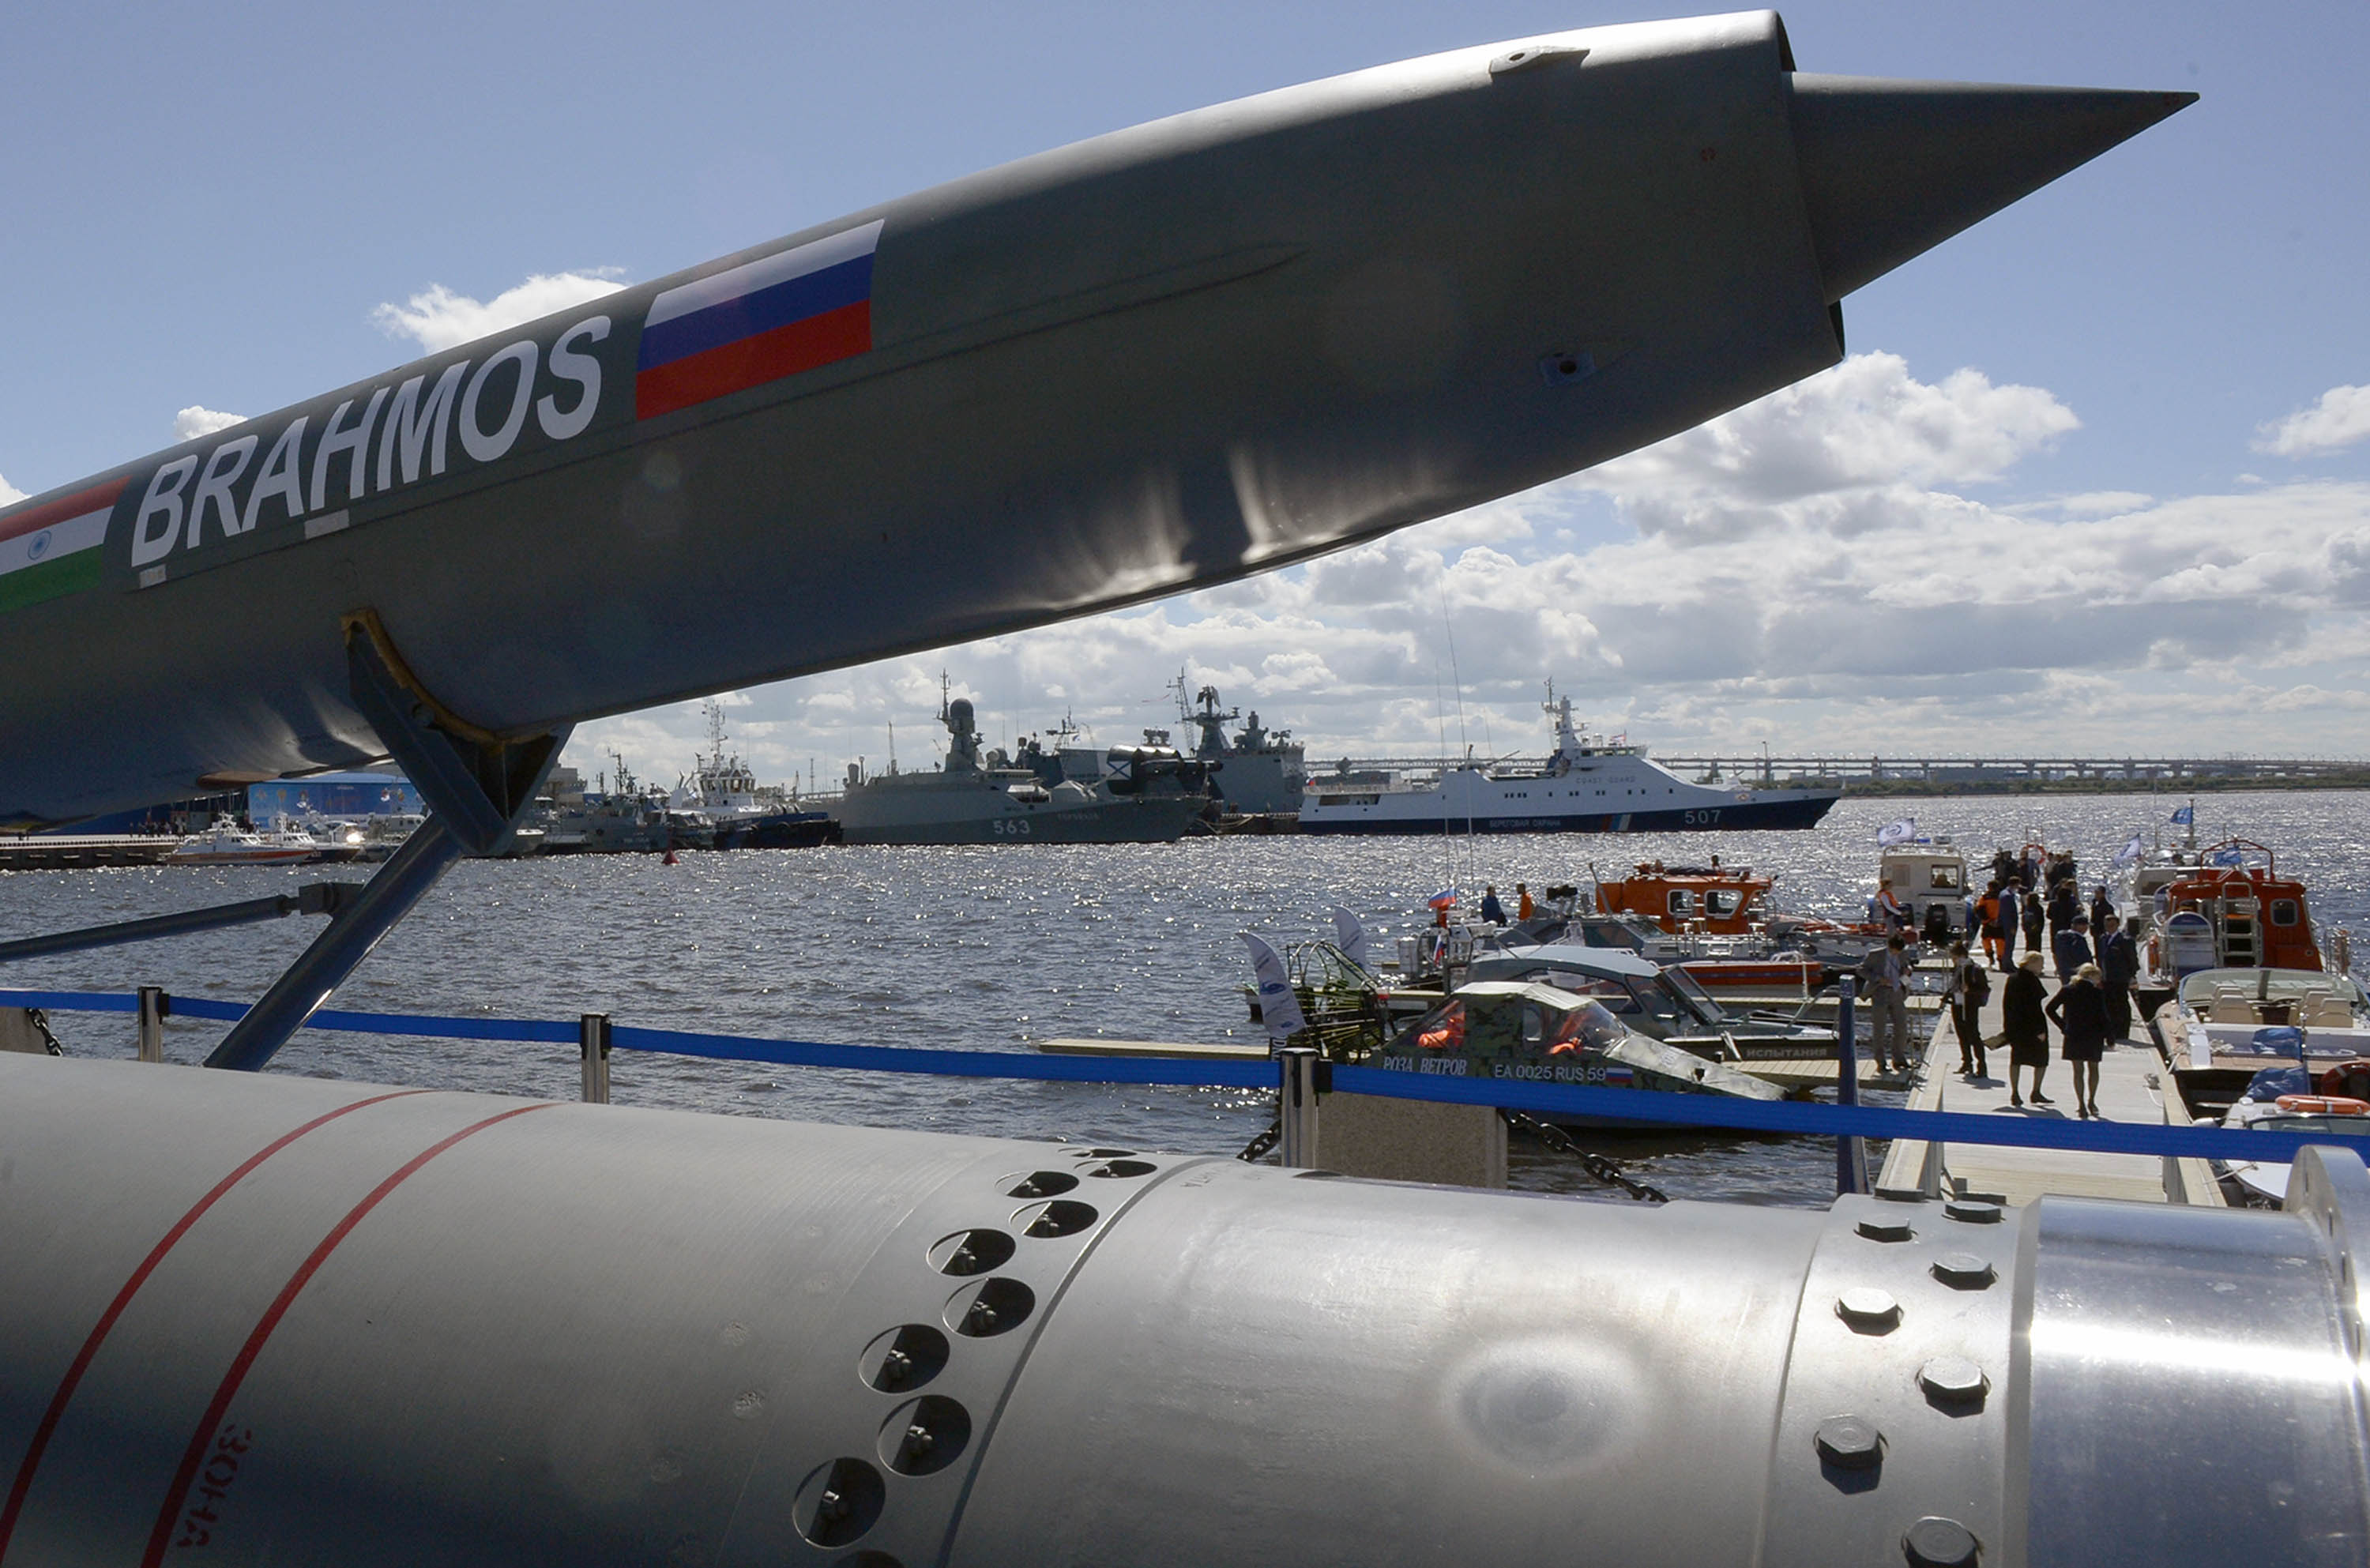 A Brahmos supersonic cruise missile is on display at the International Maritime Defense Show in Saint Petersburg on June 28, 2017. (Olga Maltseva/AFP/Getty Images)